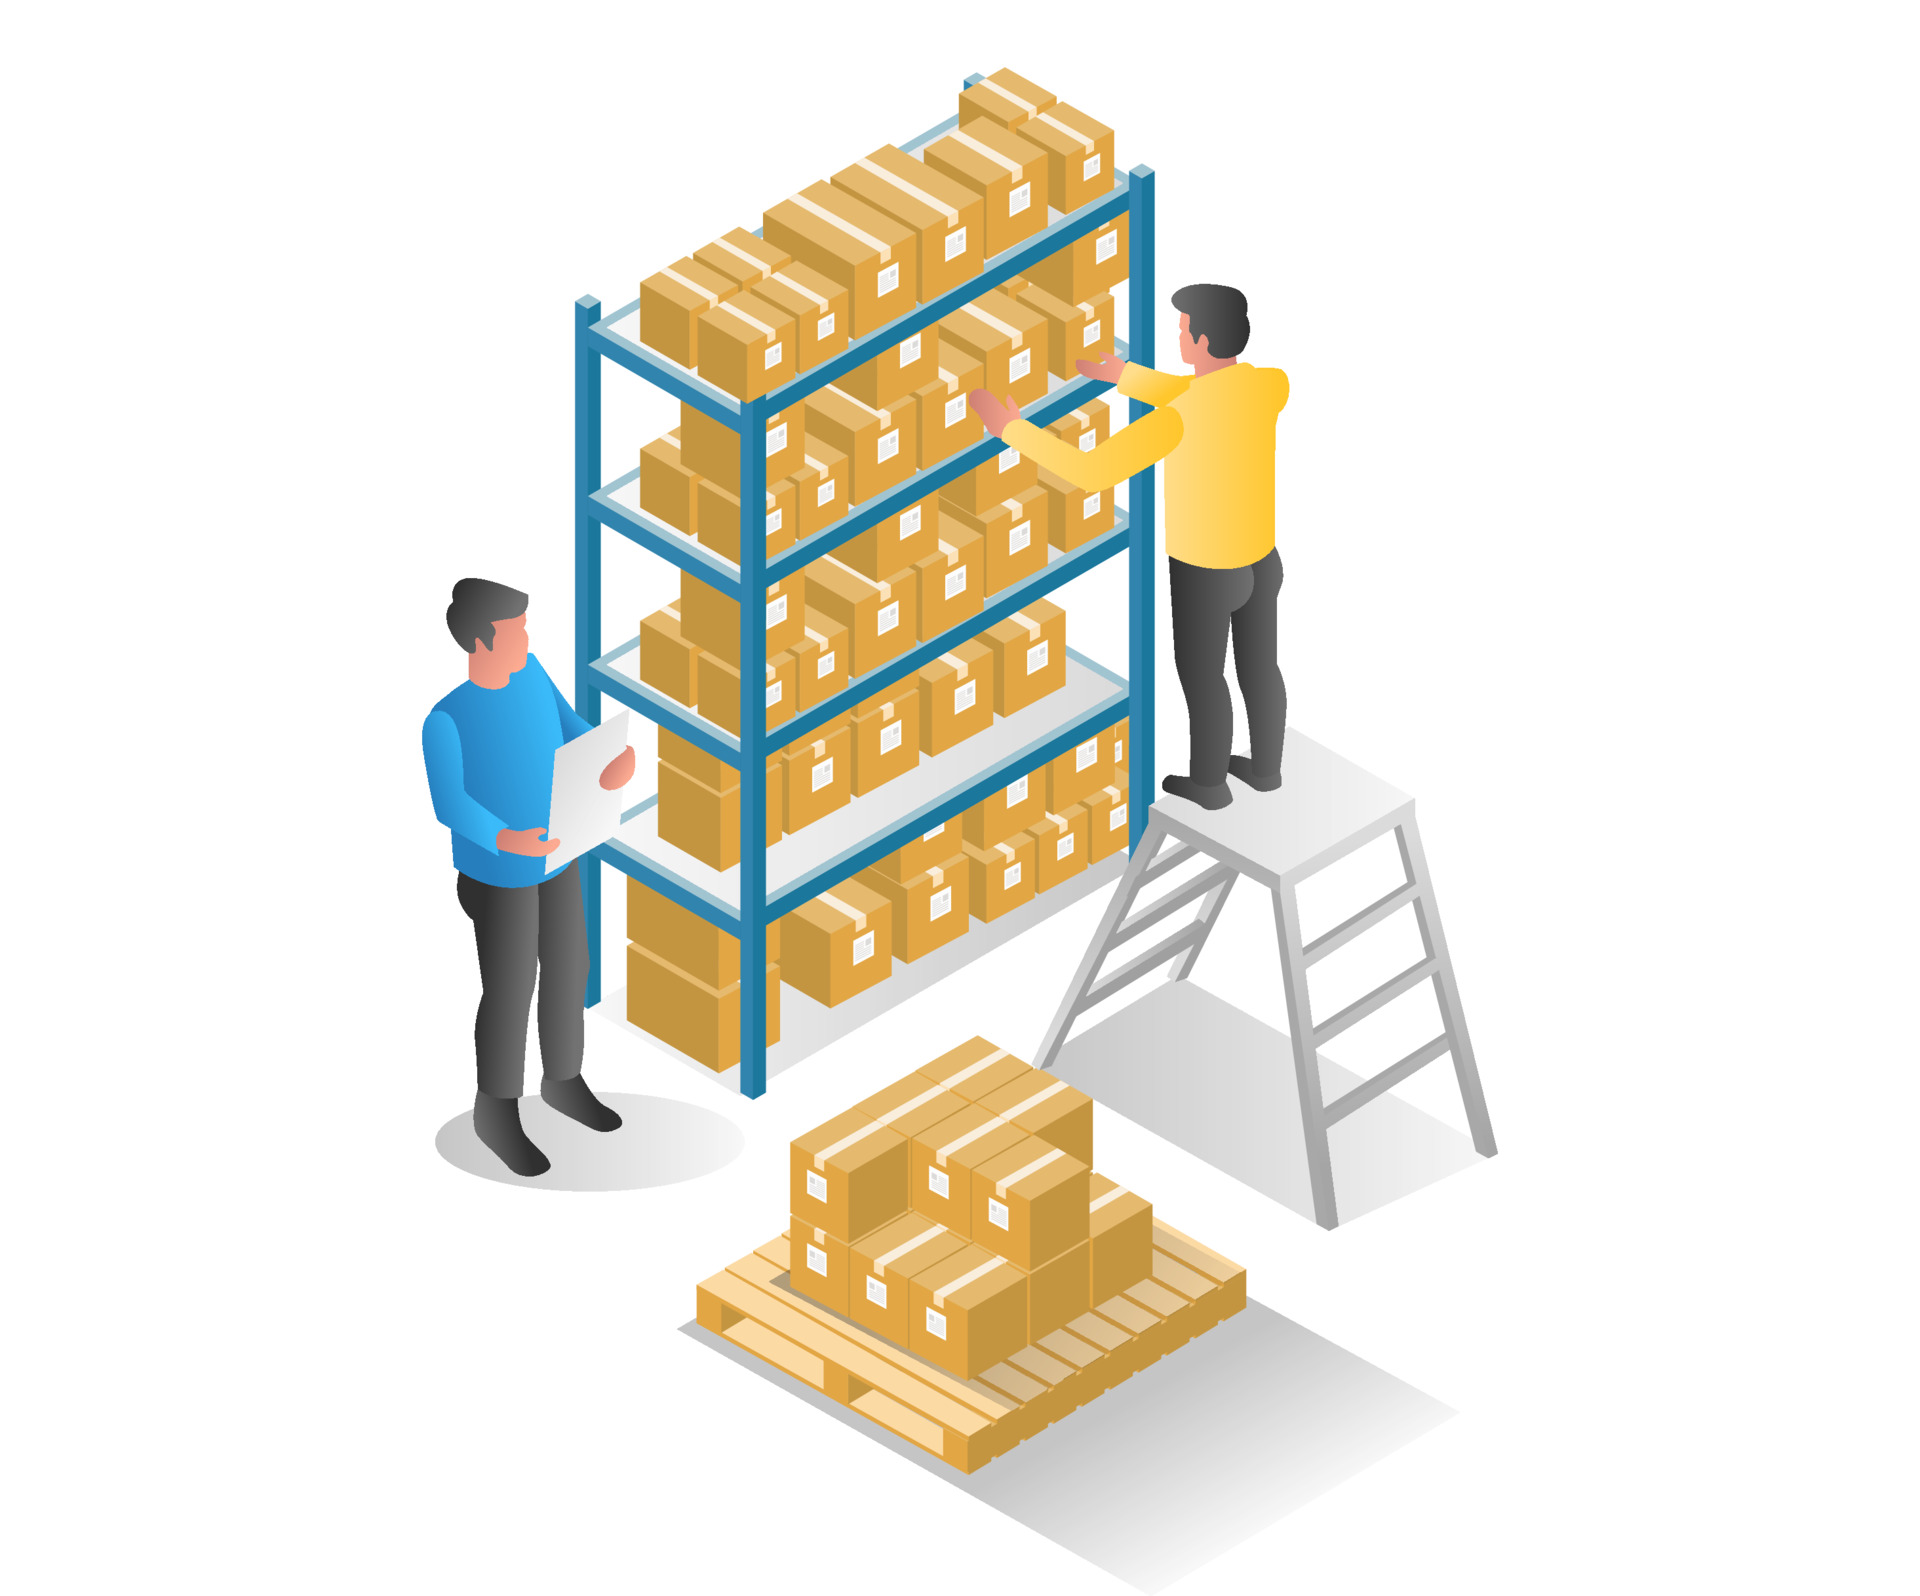 vecteezy_flat-isometric-illustration-concept-two-men-stacking-things_7885710